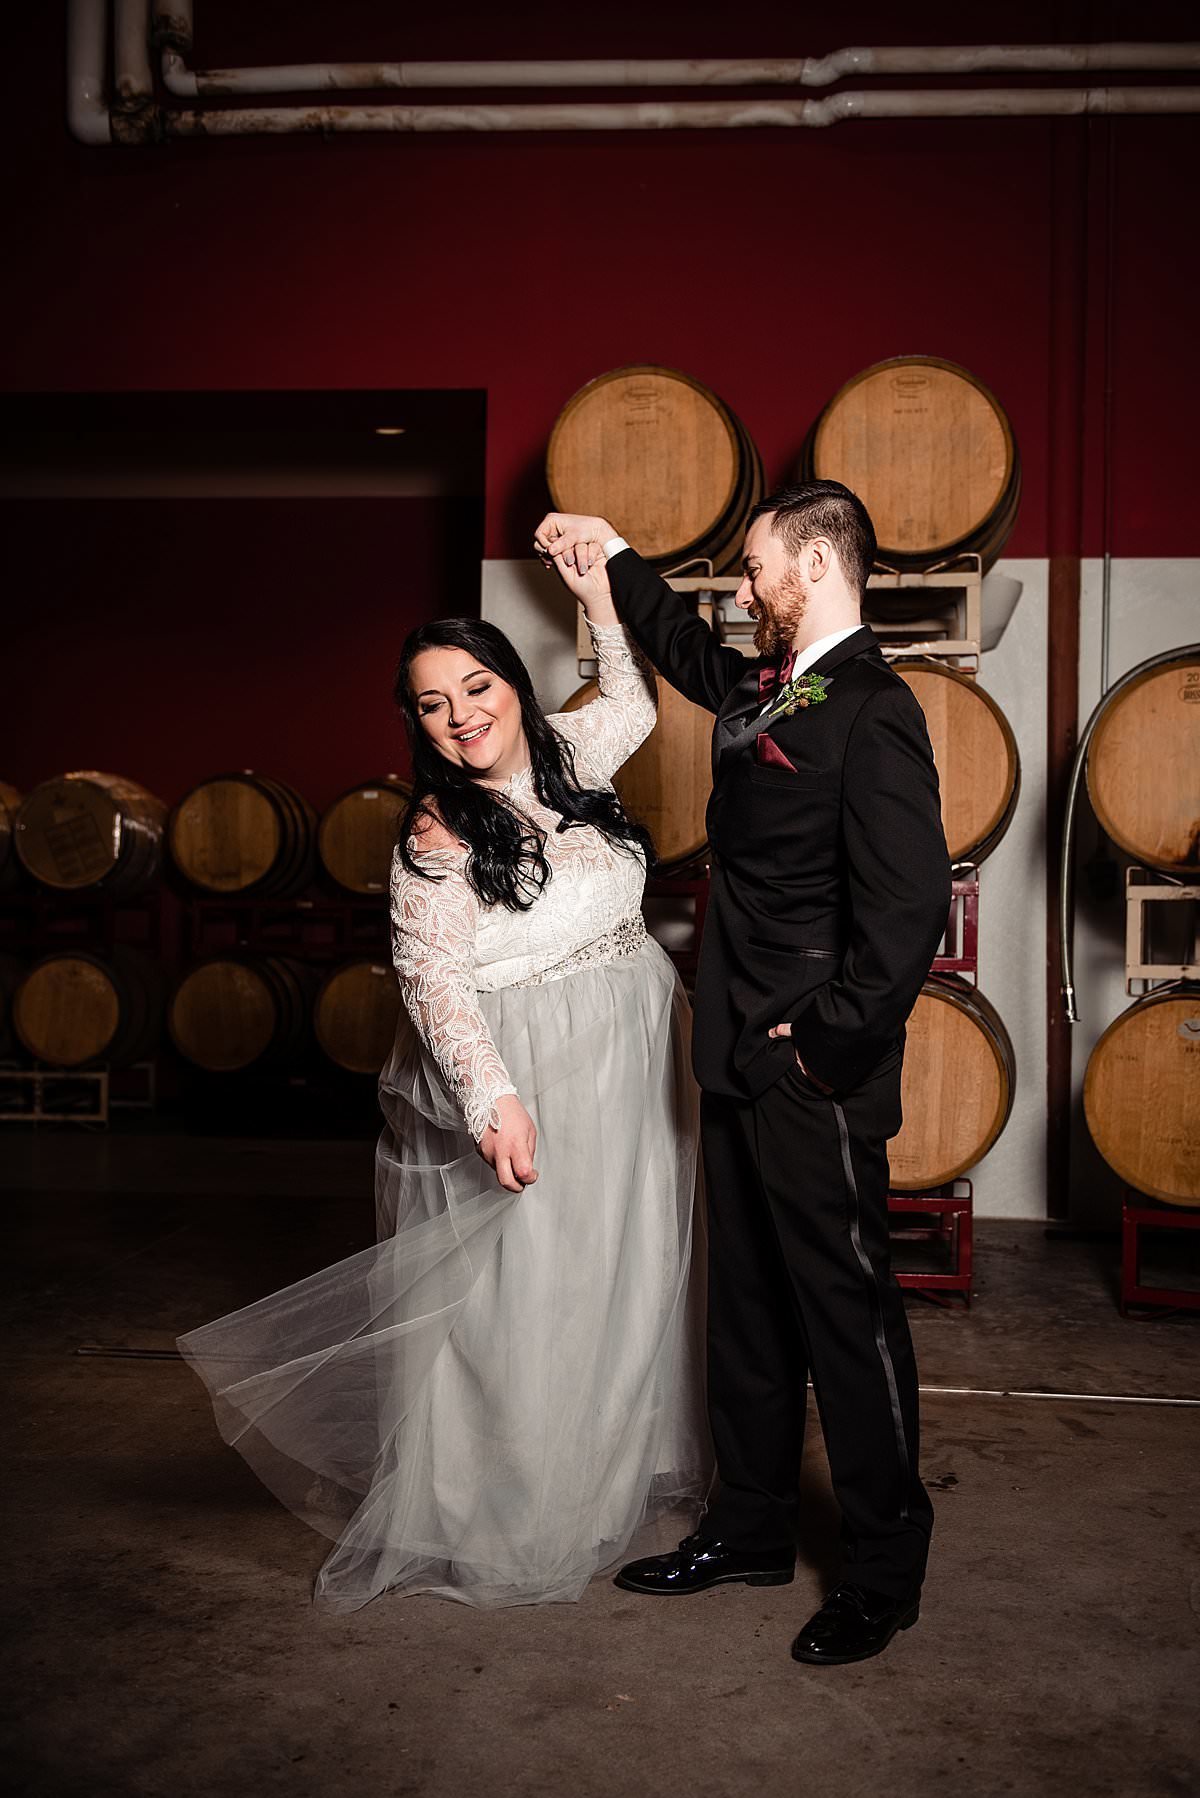 Elopement portrait in front of wine barrels at City Winery in Nashville, bride is wearing a grey tulle skirt and long sleeve lace top.